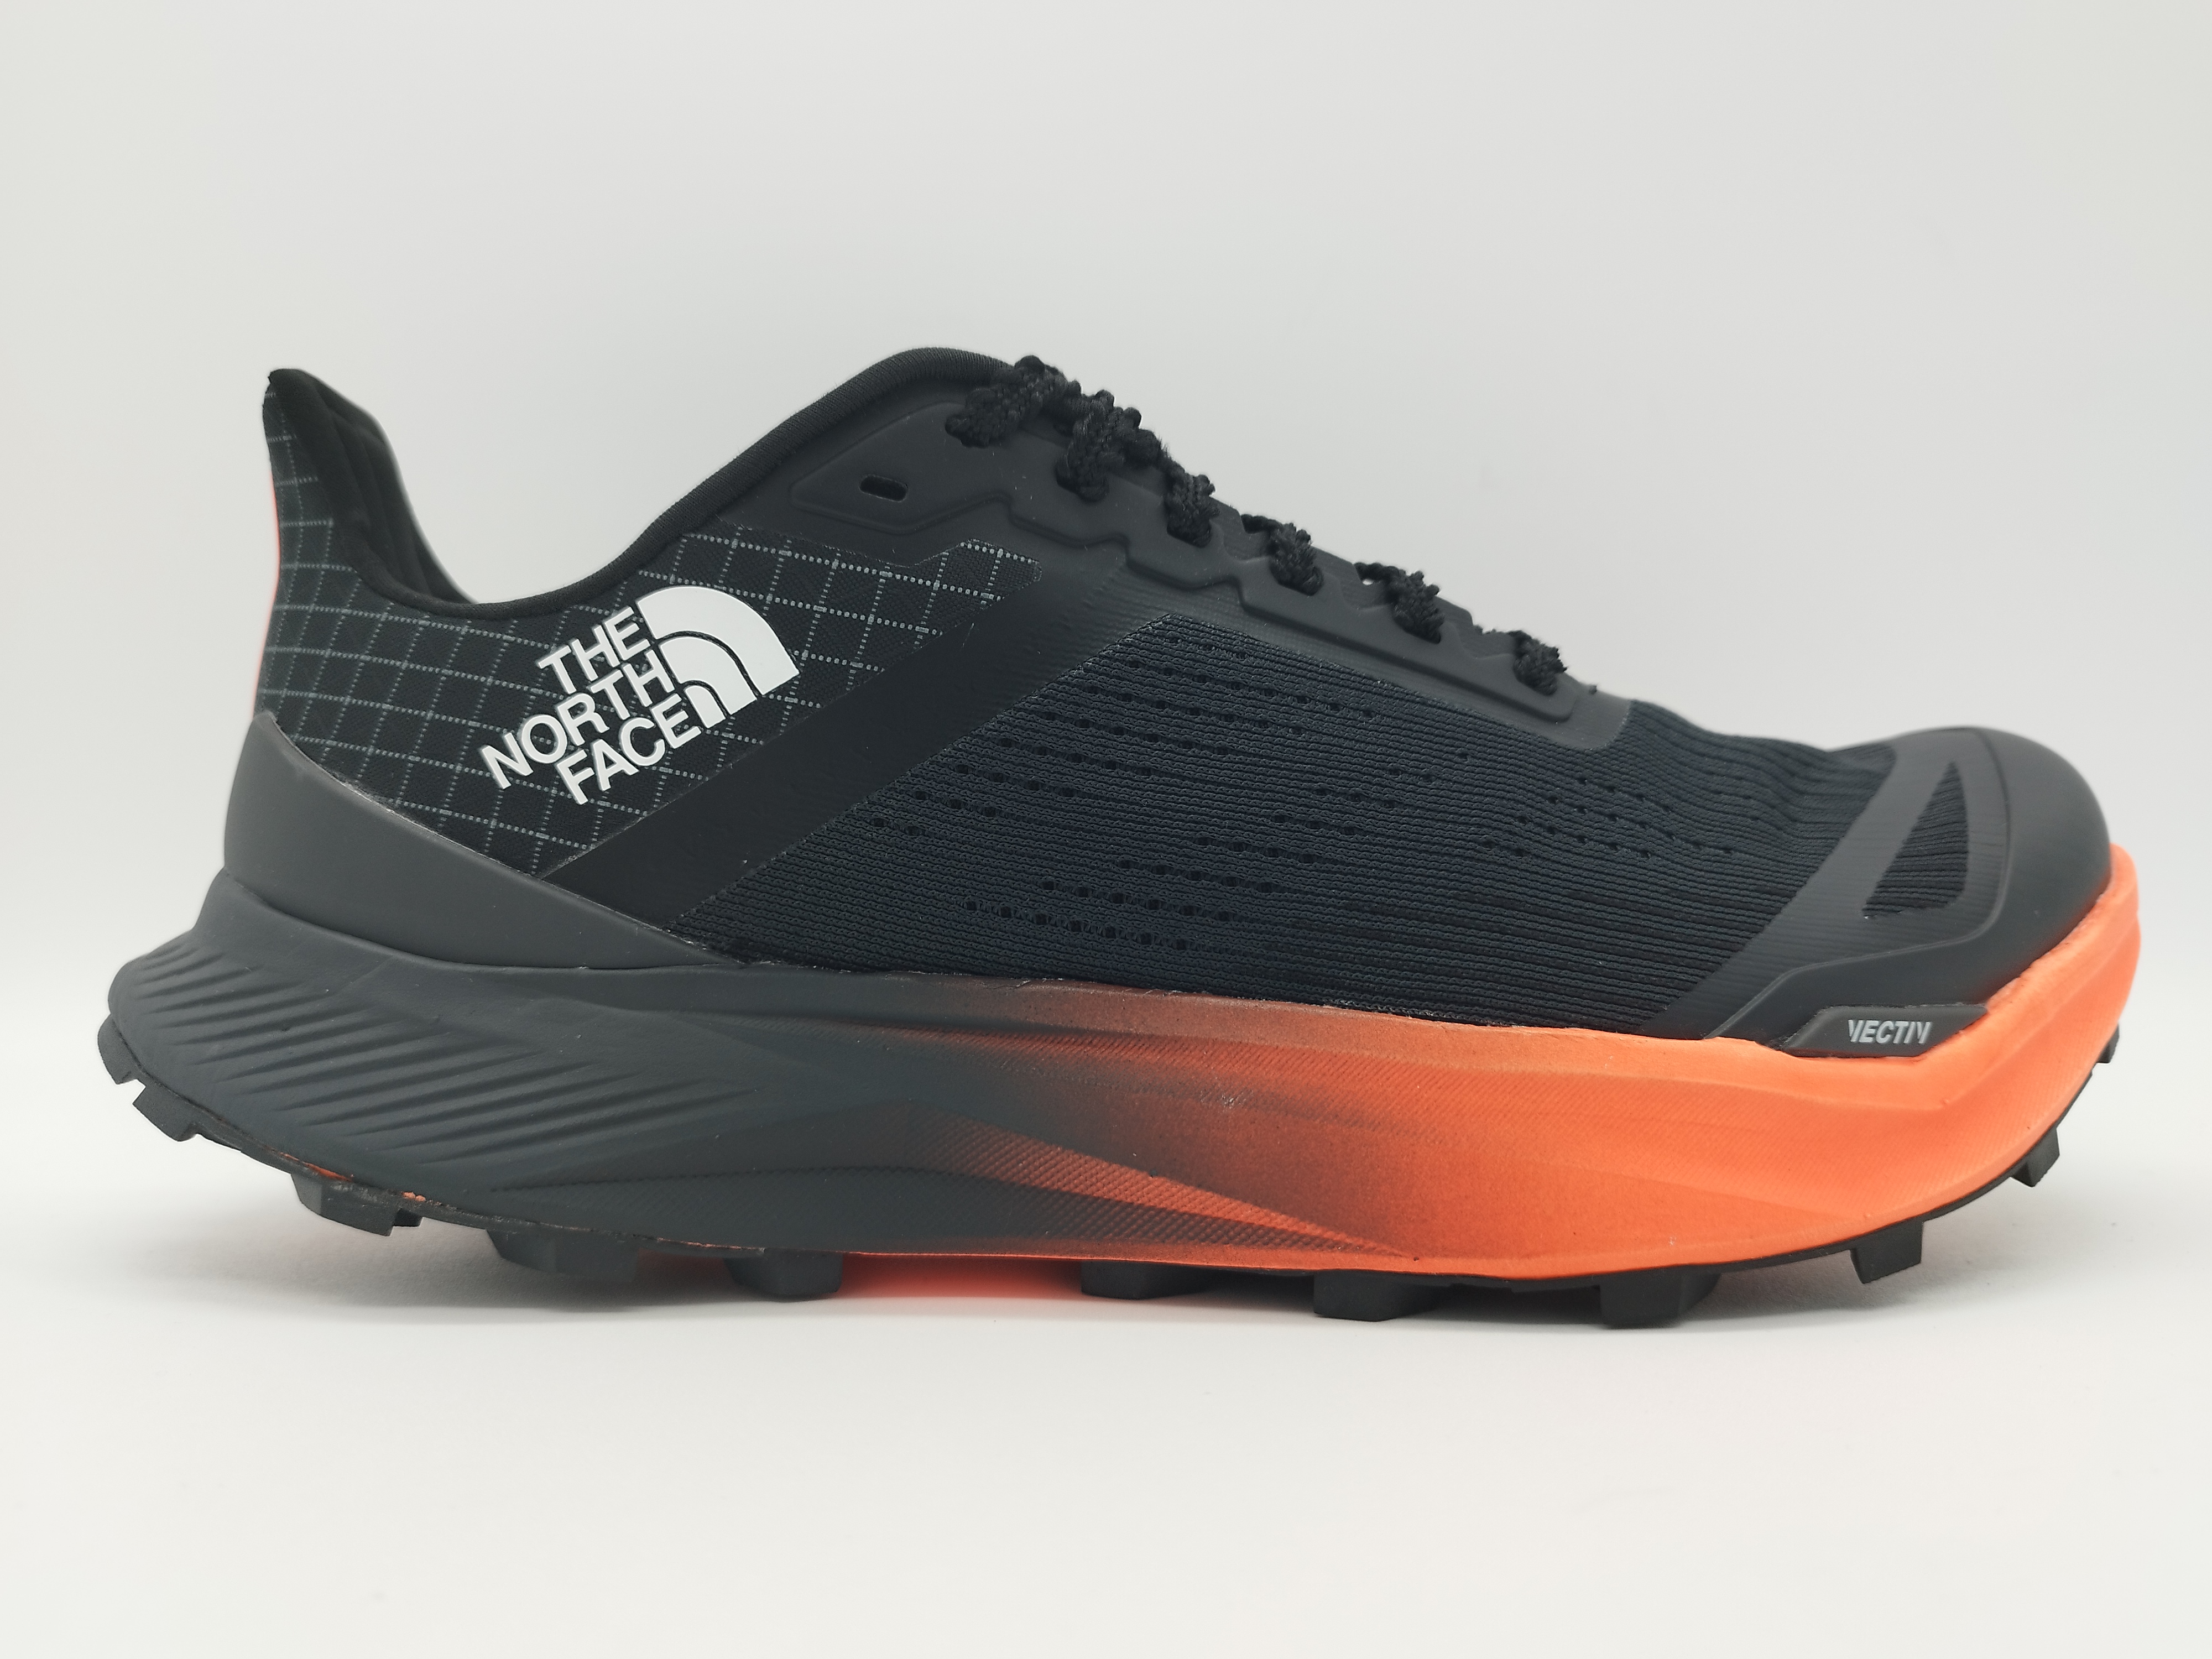 THE NORTH FACE VECTIV INFINITE II - RiosRunning